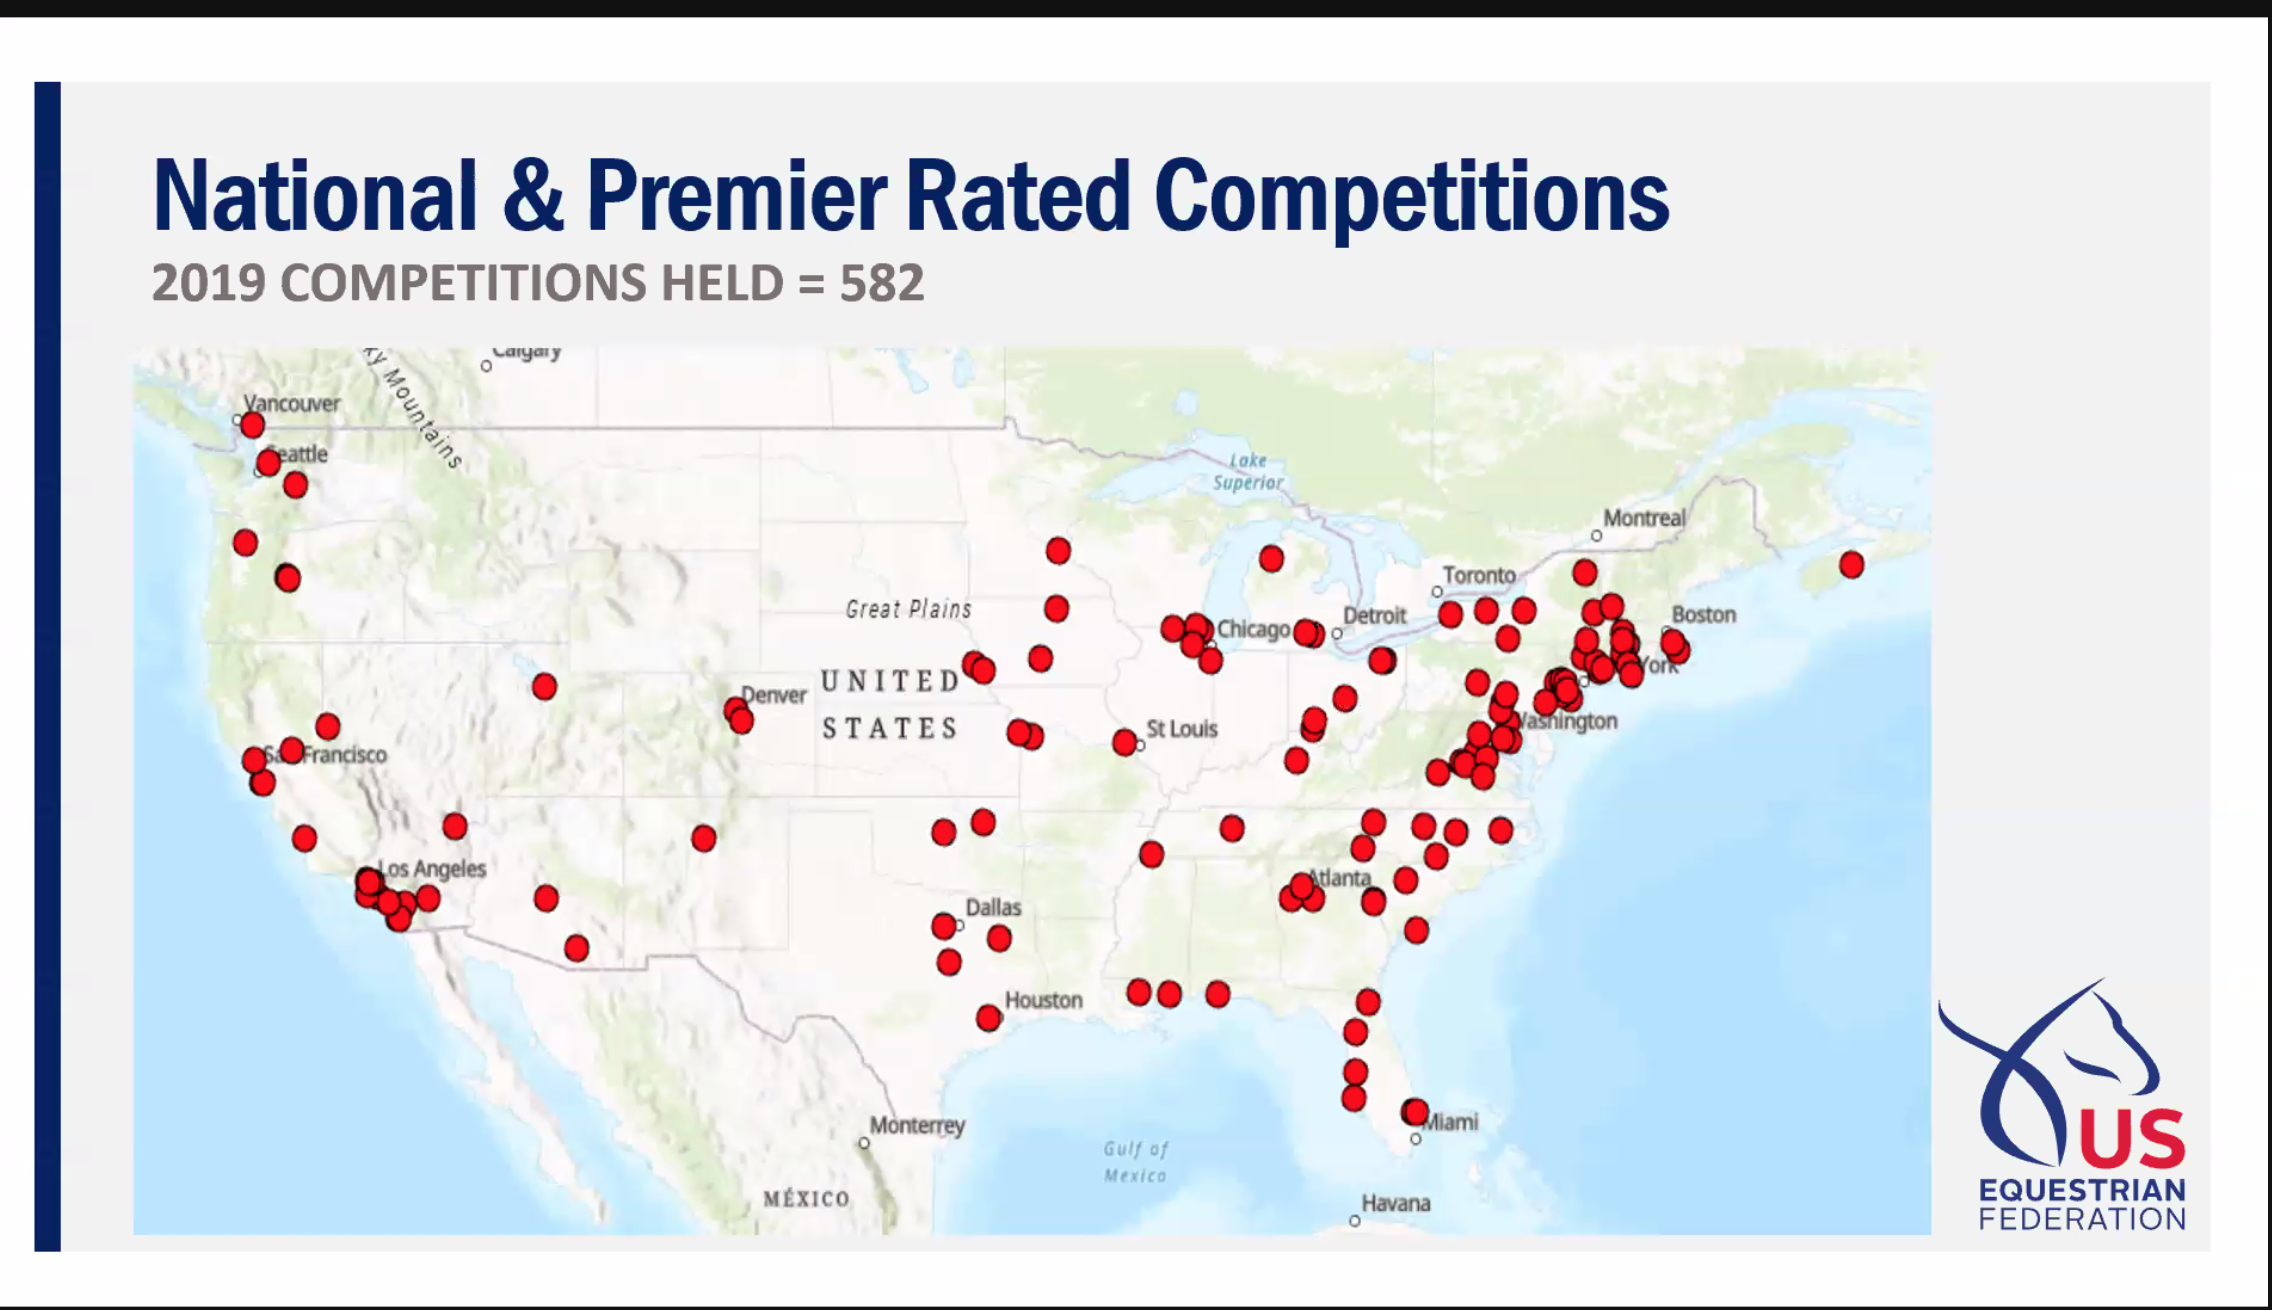 *National & Premier rated competitions